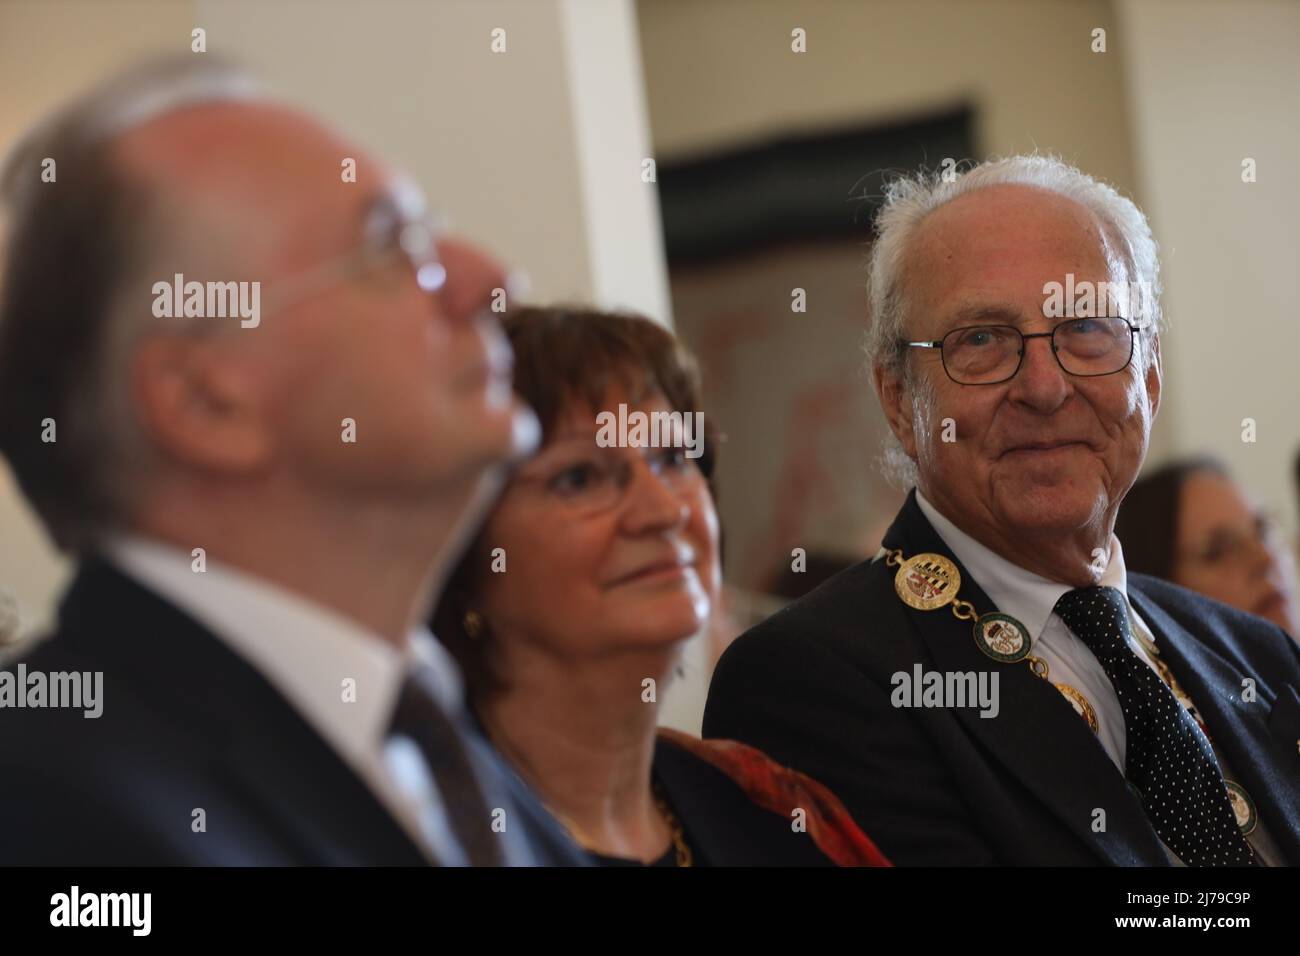 07 May 2022, Saxony-Anhalt, Ballenstedt: Eduard Prince of Anhalt sits next to Saxony-Anhalt's Prime Minister Reiner Haseloff and his wife Gabriele in the castle chapel. Eduard von Anhalt celebrates his 80th birthday in Ballenstedt. At the same time the investiture took place. Within the scope of the Investiture, persons are honored annually for special achievements by the Ascanian House Order 'Albrecht the Bear'. The investiture takes place in the presence of Eduard Prince of Anhalt. Photo: Matthias Bein/dpa-Zentralbild/ZB Stock Photo